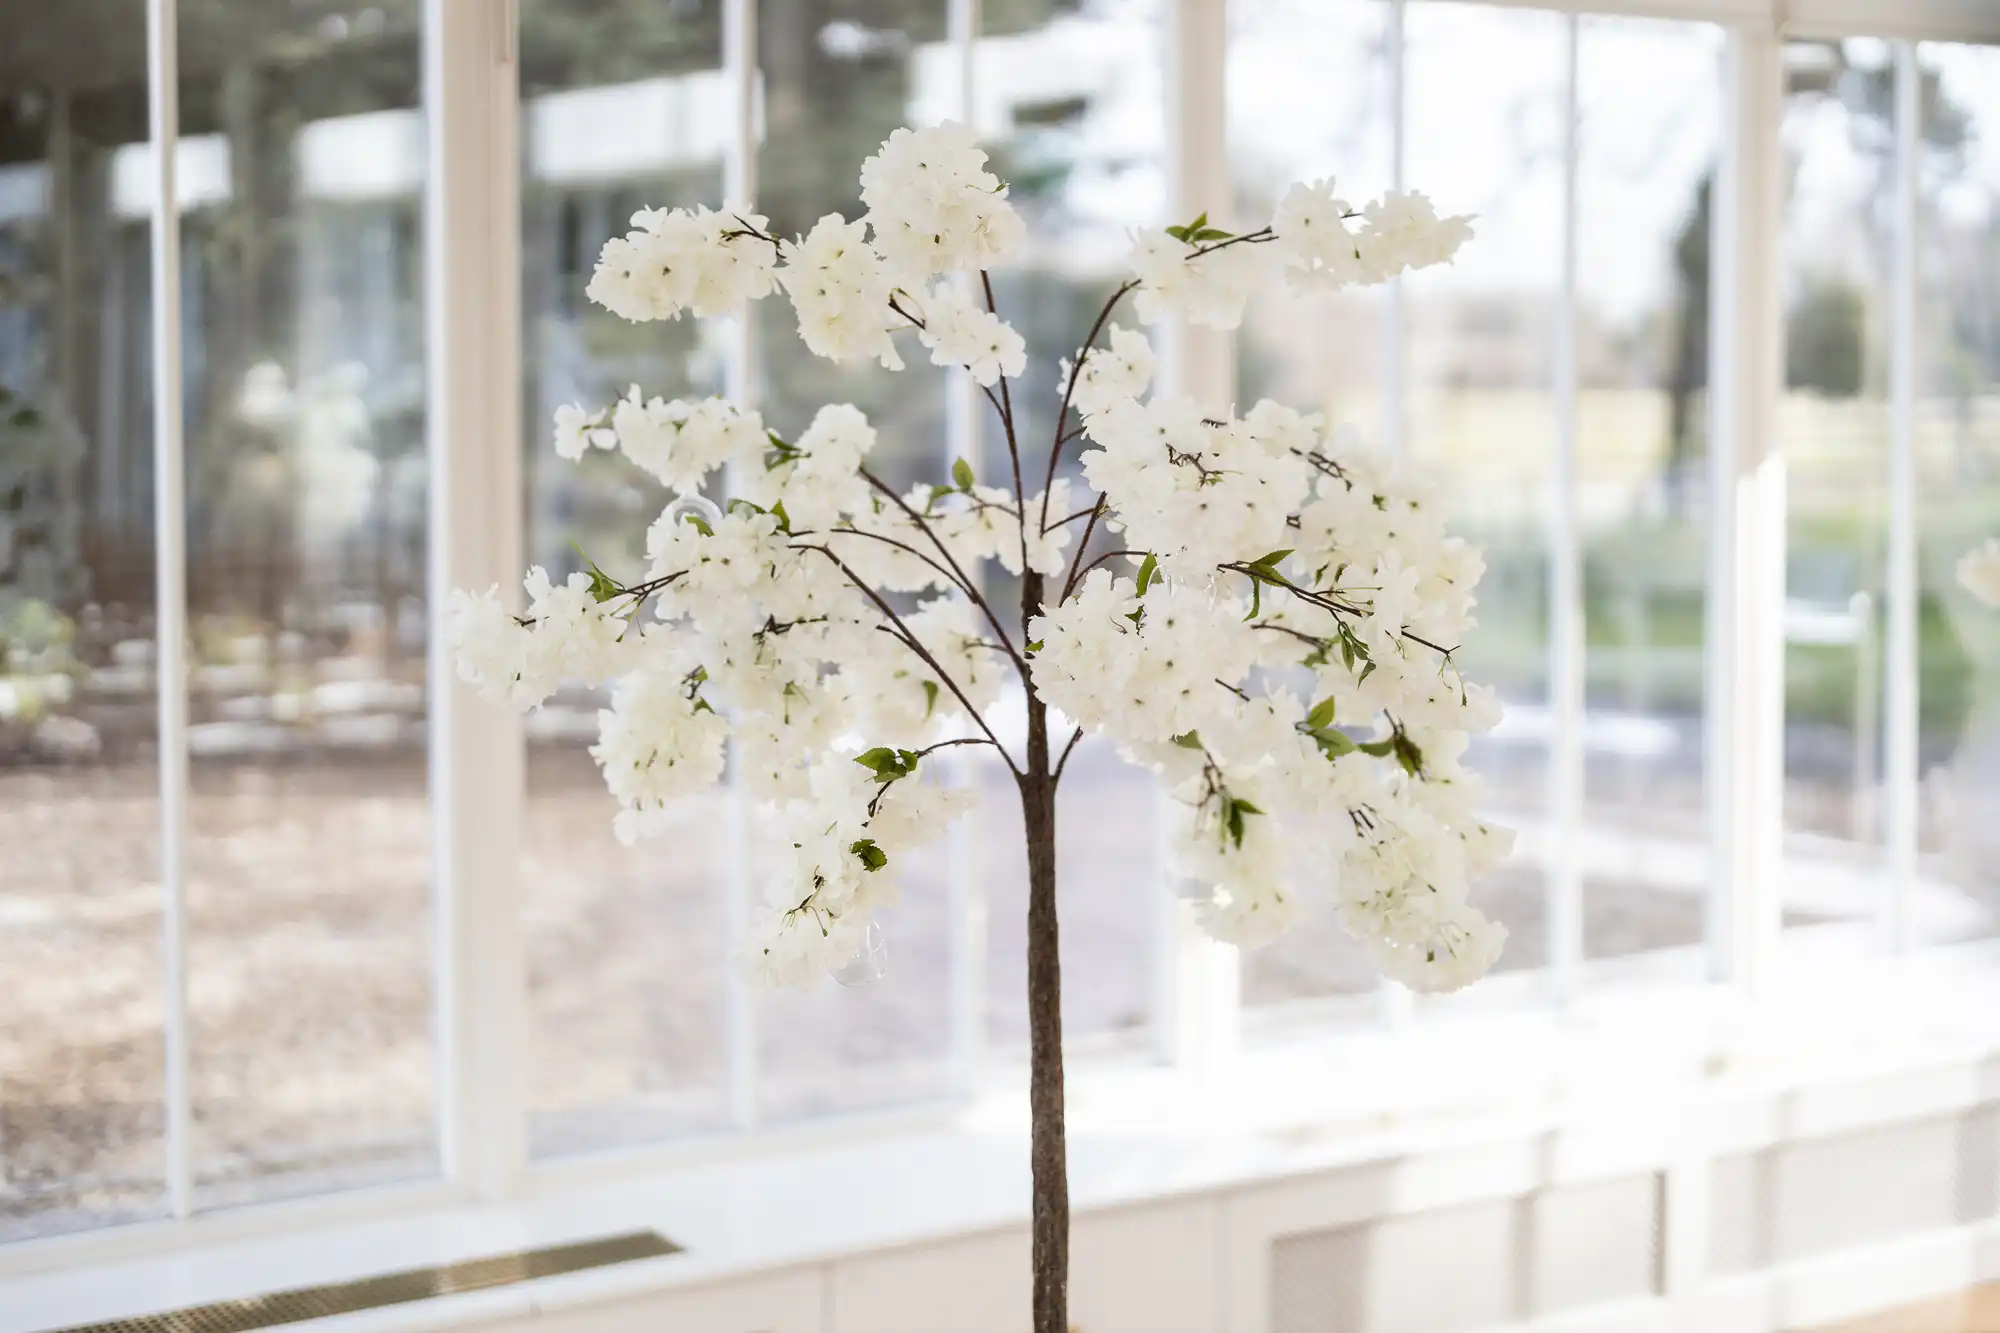 A tree with white blossoms stands inside a bright room with large windows.